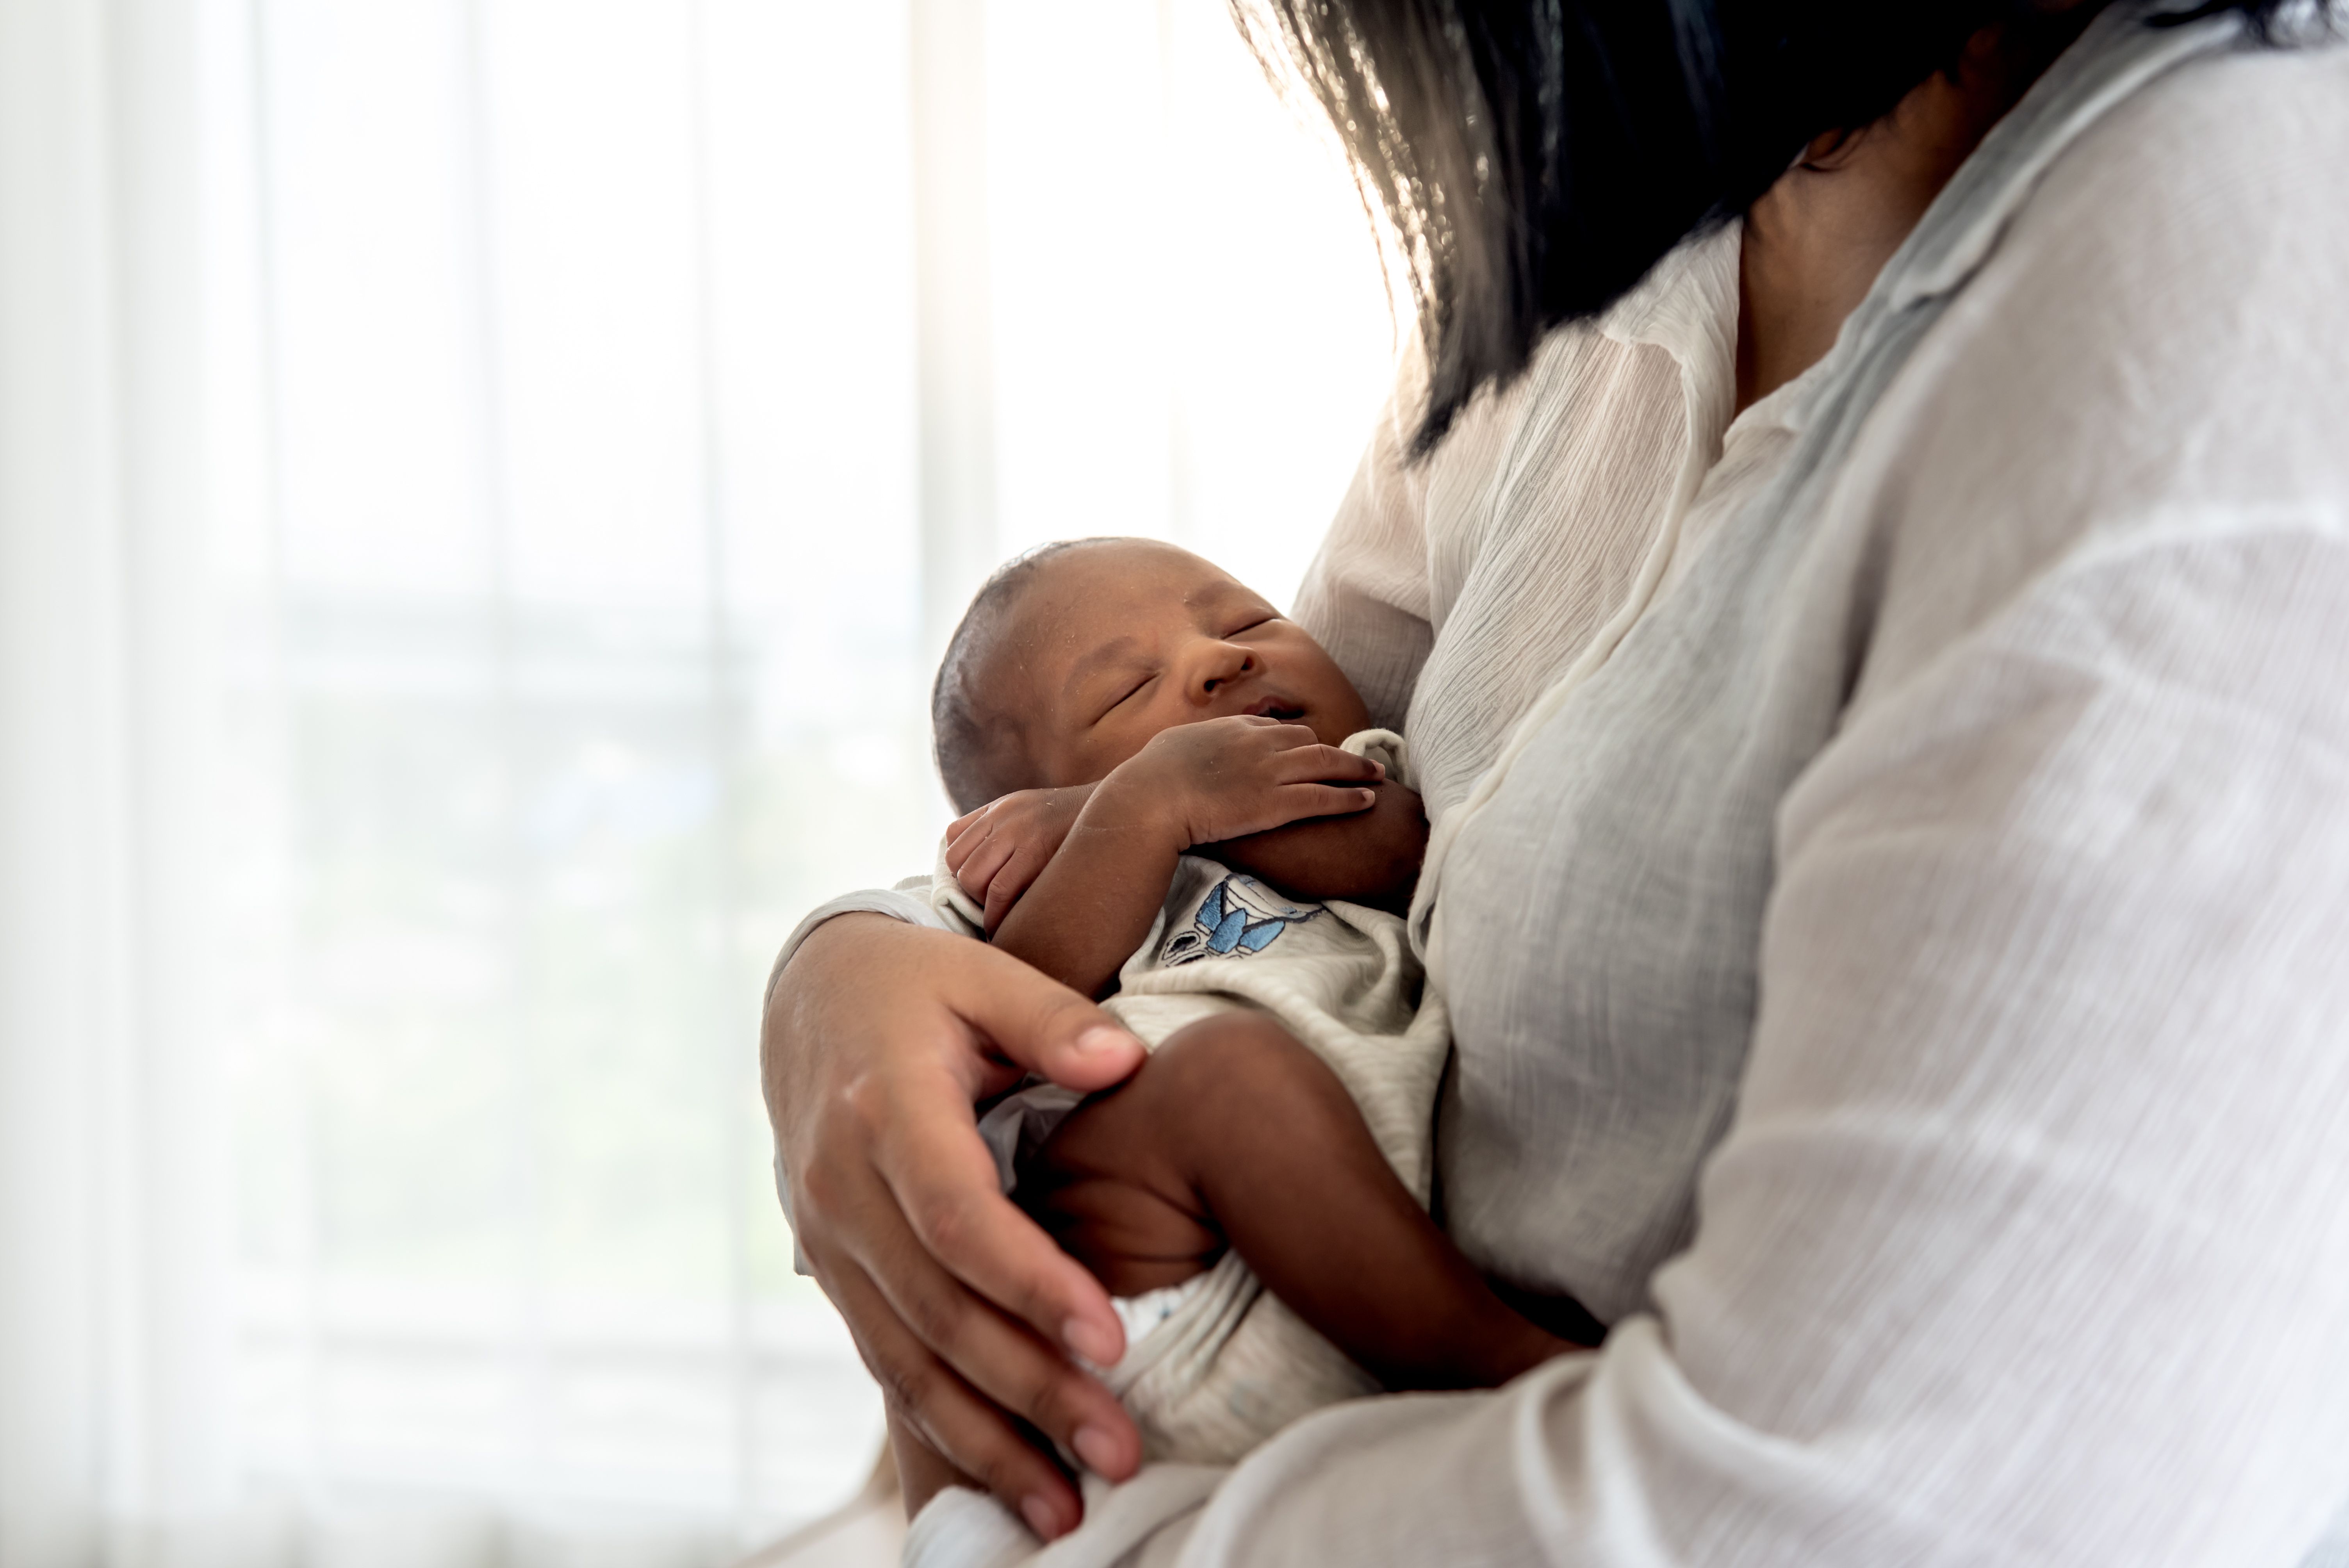 One study suggests further research is needed into racial discrimination of non-Hispanic Black parents, which could be driving high rates of preterm birth.